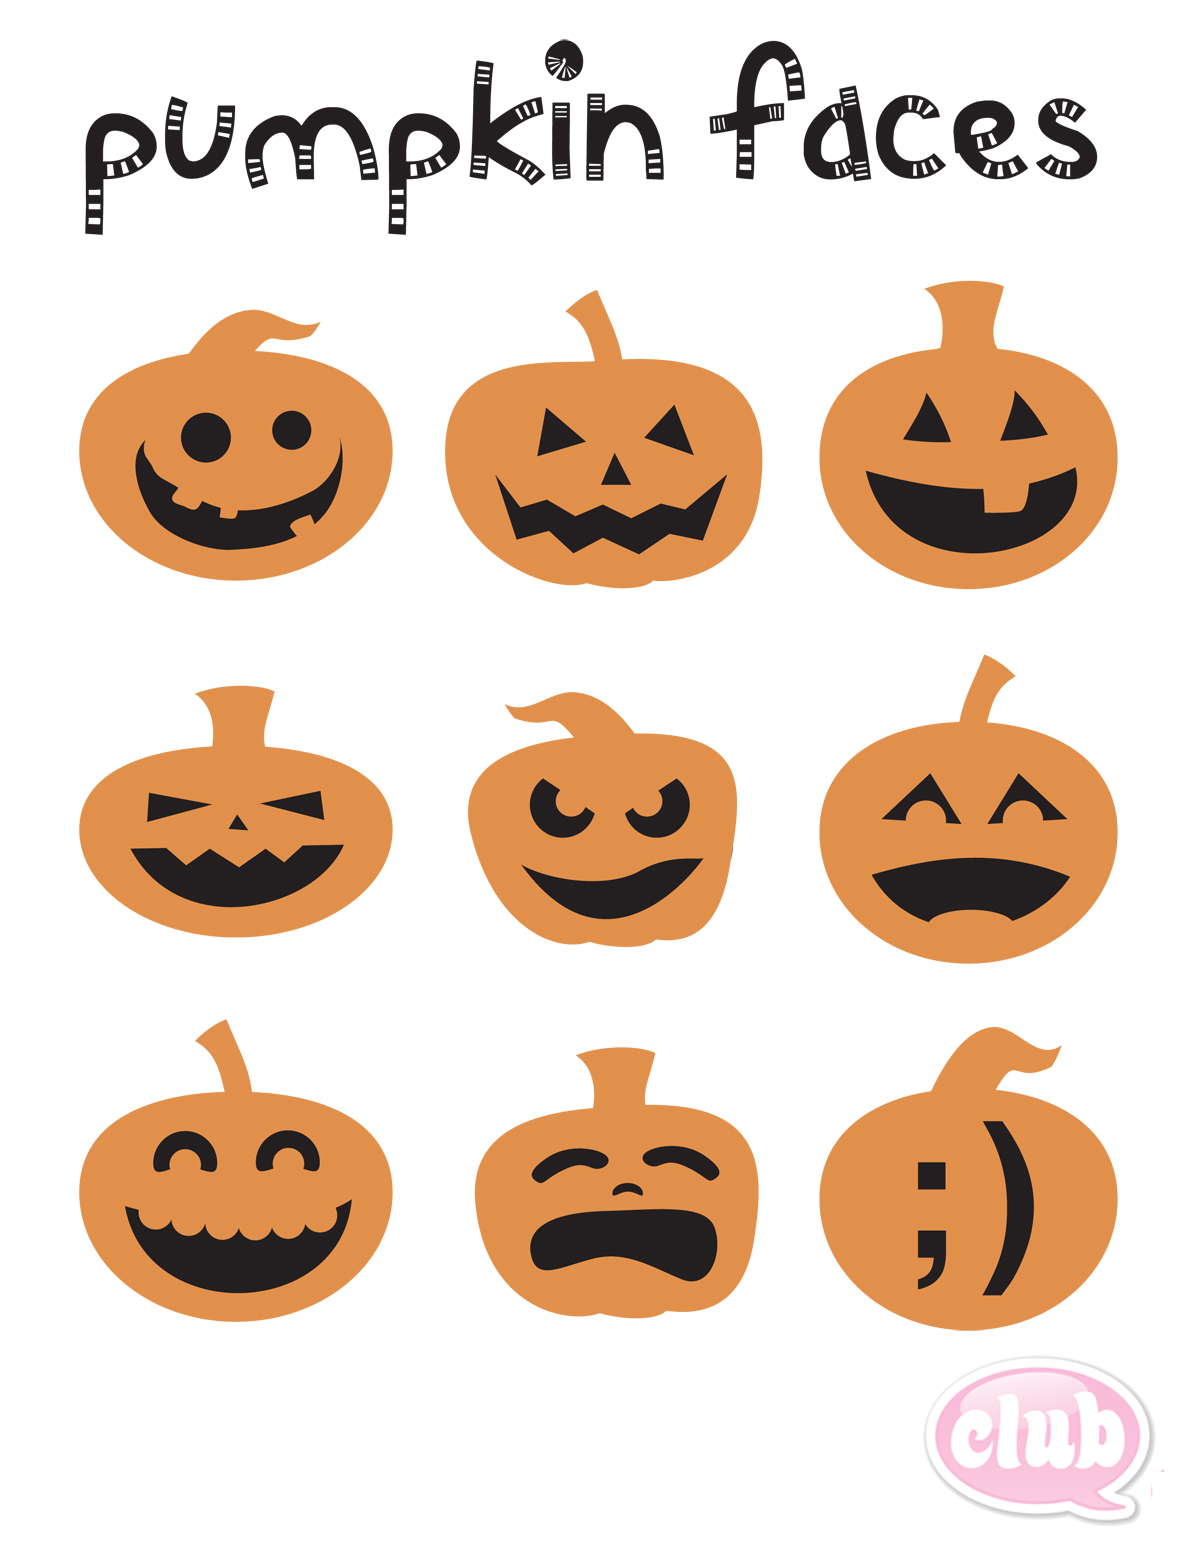 How to draw halloween faces ann's blog